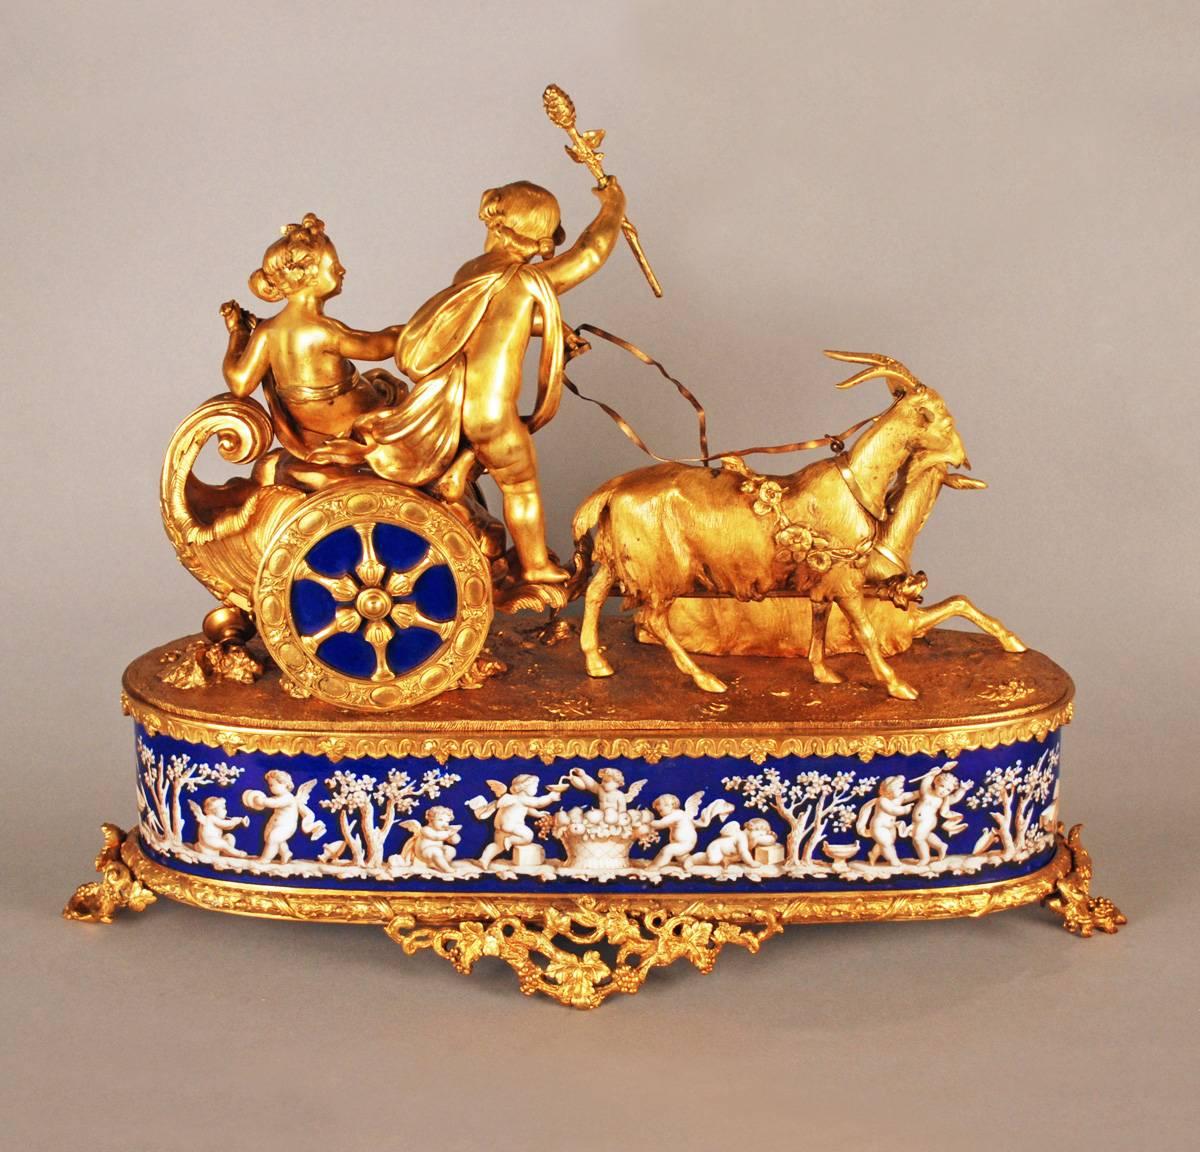 Amazing and rare 19th century French gilt bronze clock surmounted by two finely crafted cherubs riding a chariot drawn by a pair of wonderfully detailed goats. Clock is in working condition.

The blue clock face bears the name of Alphonse Giroux,